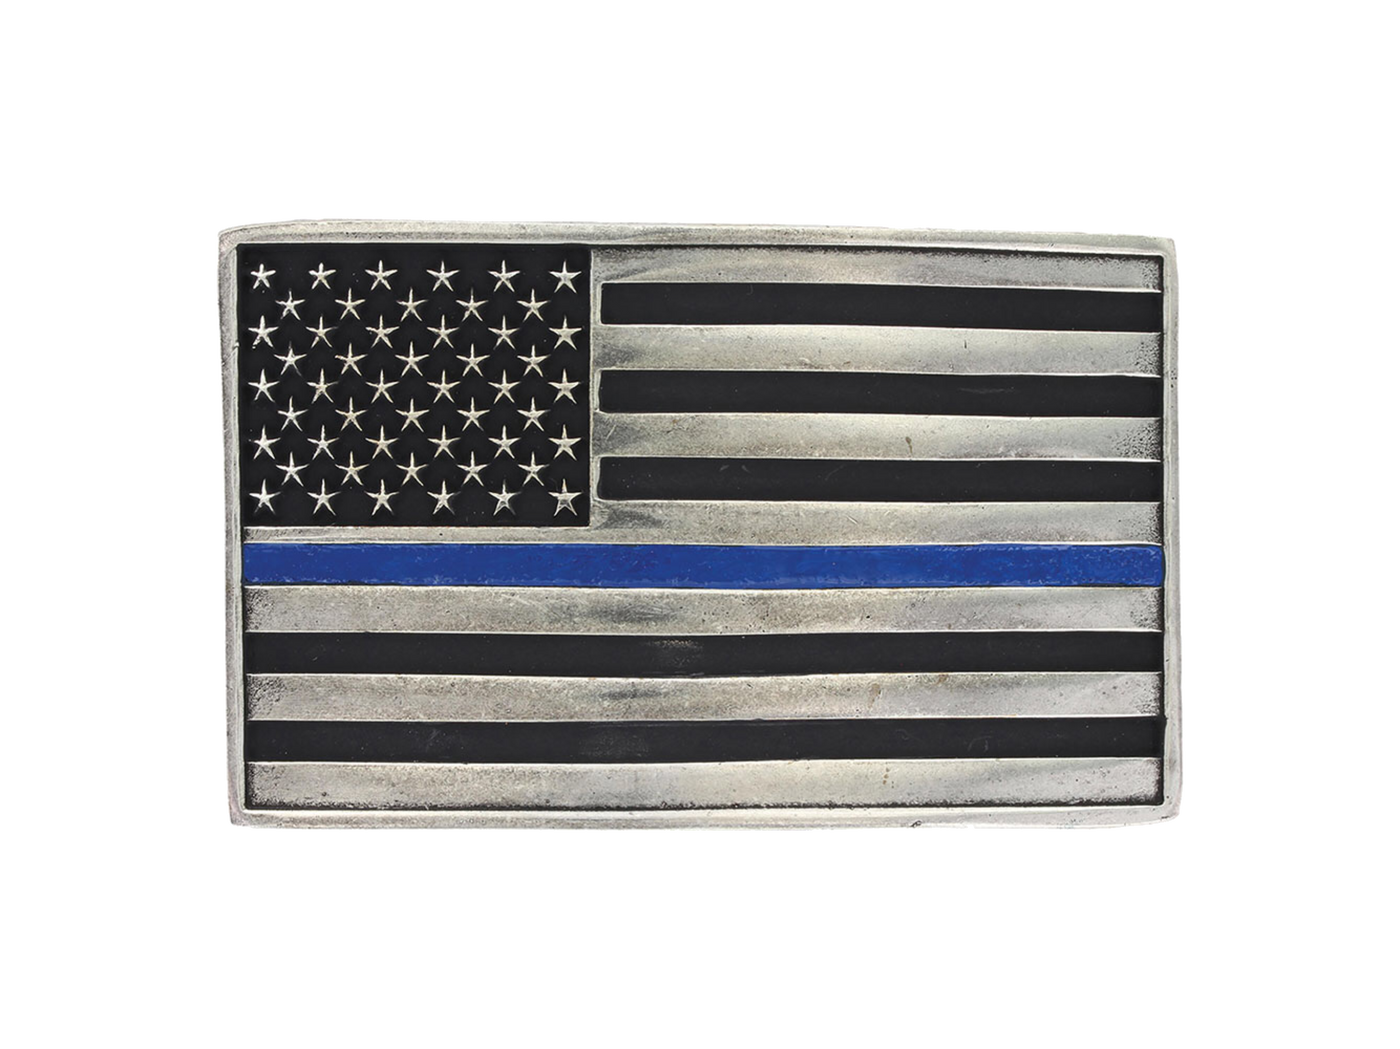 The thin blue line represents the sacrifice made by those that choose to help and protect regardless of the cost. Standard 1.5 inch belt swivel. Available online and at our shop just outside Nashville in Smyrna, TN.